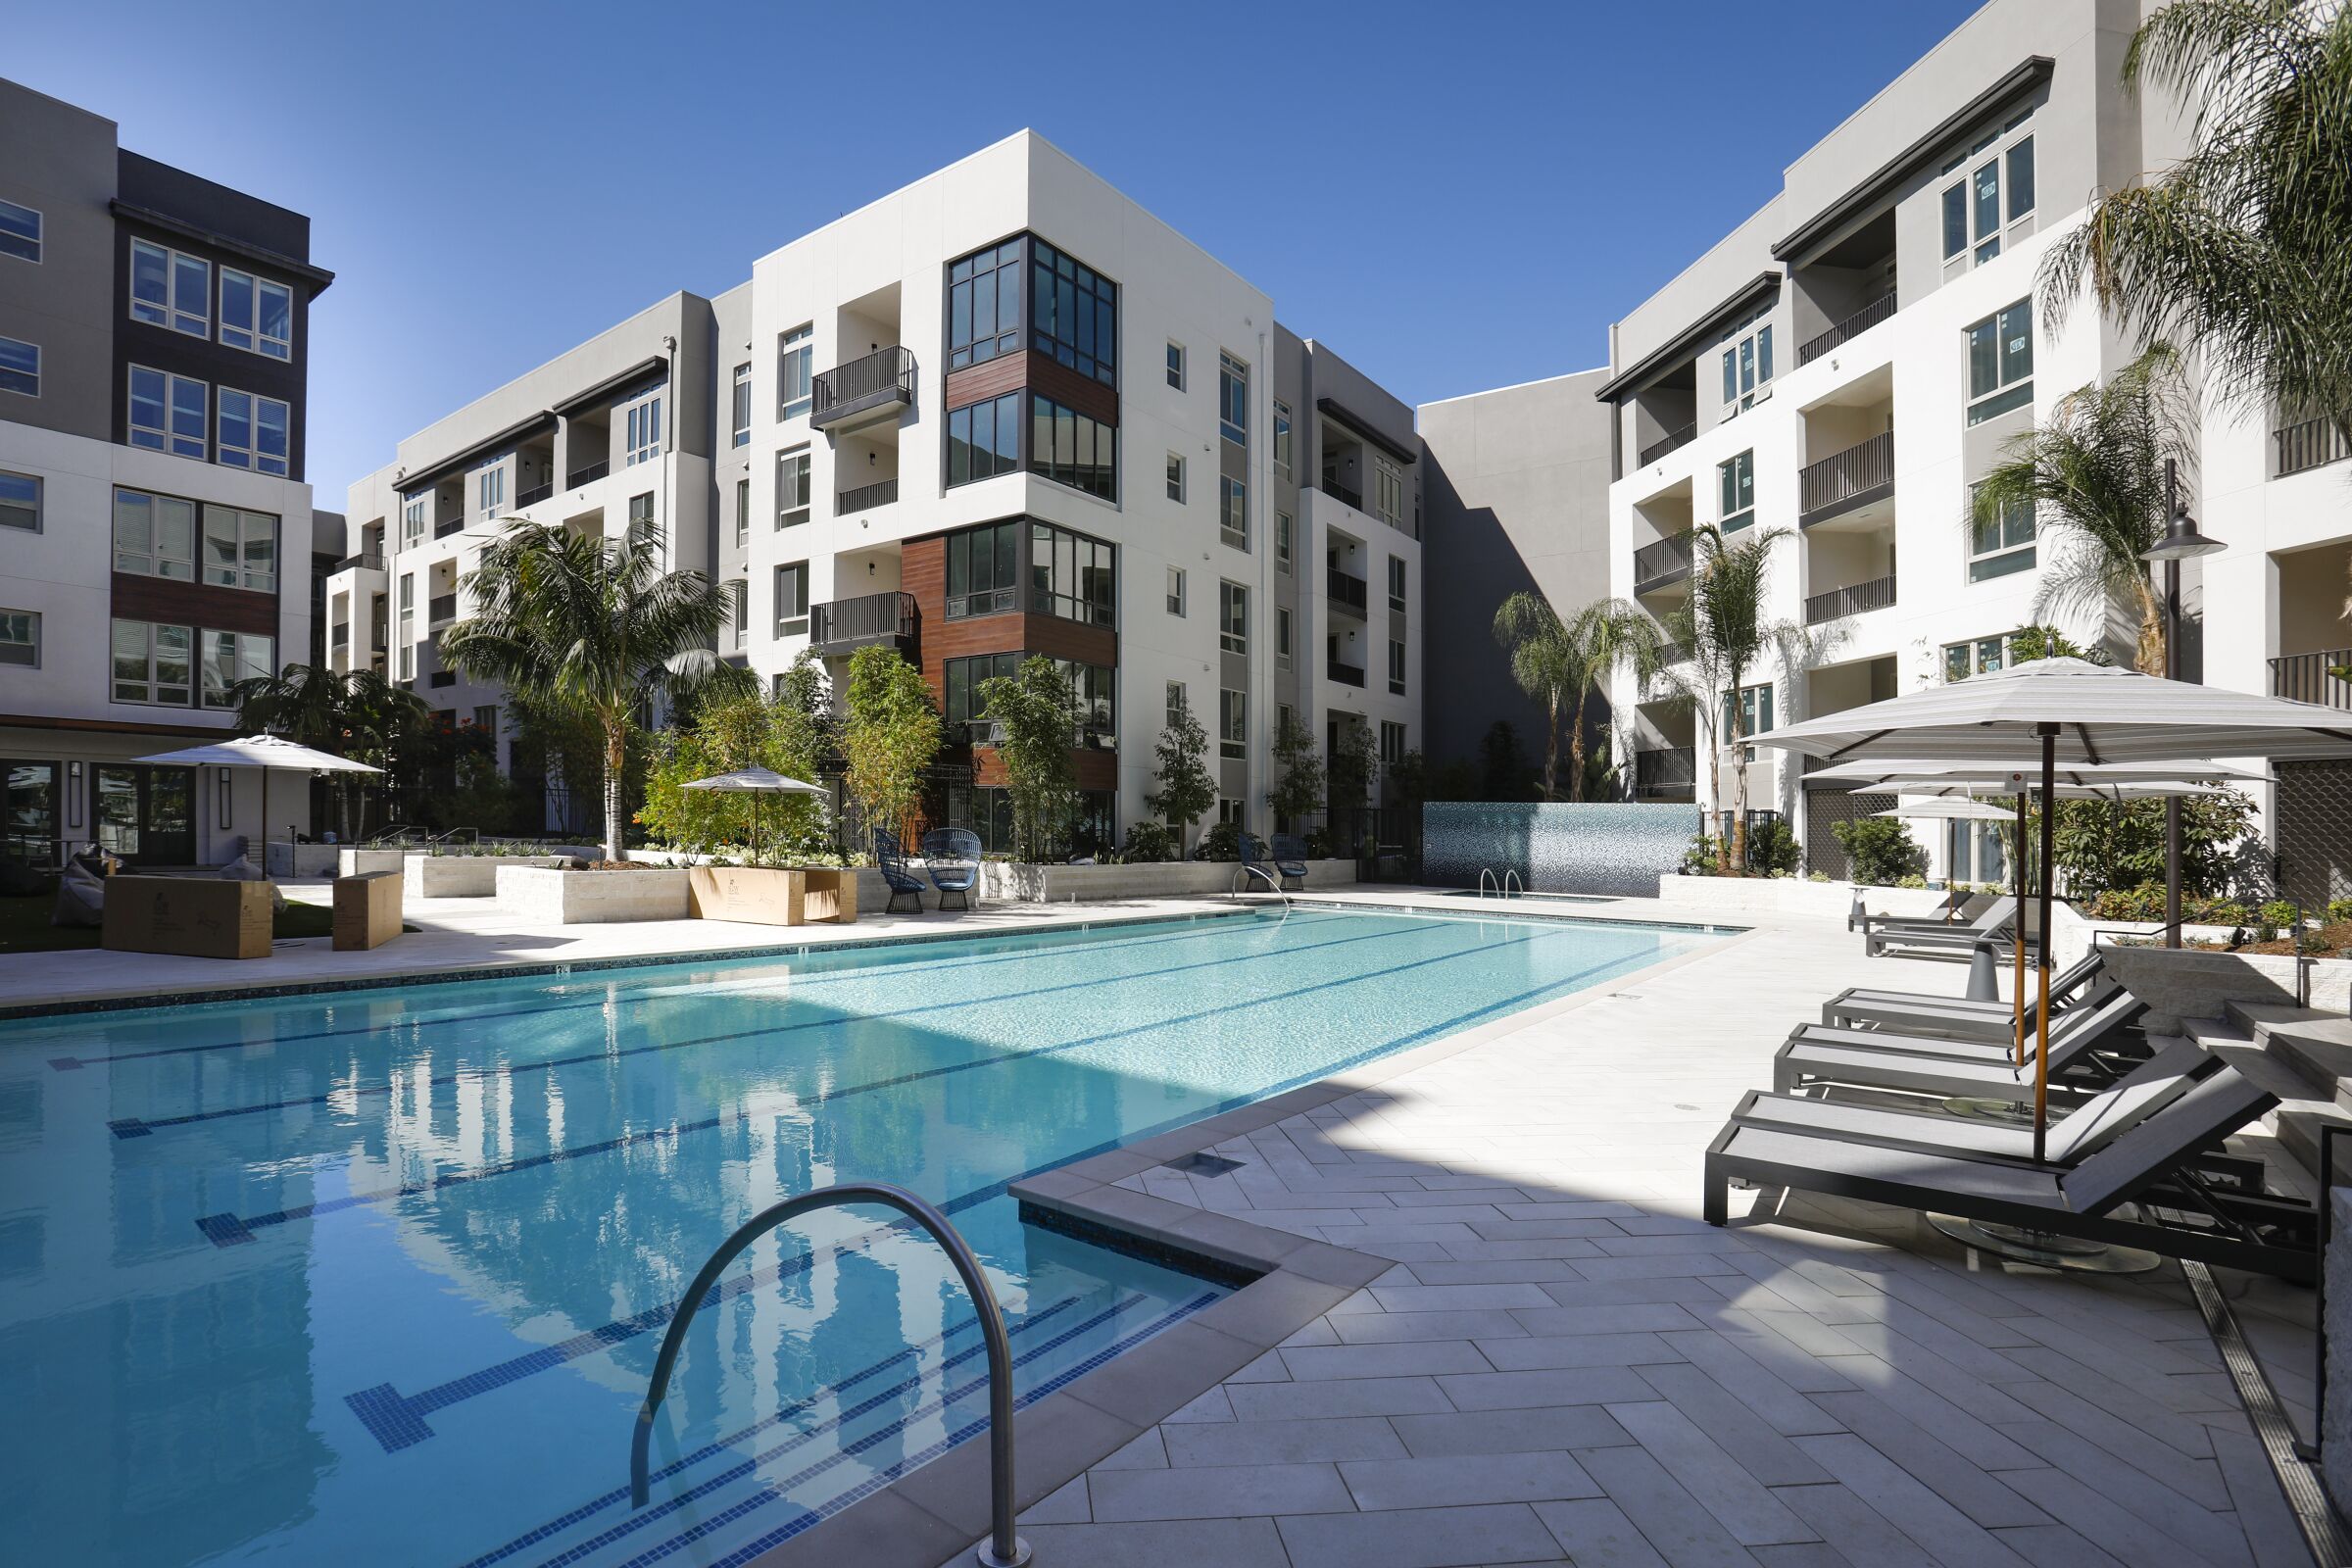 One of two swimming pools at One Paseo, the upscale apartment homes project in Carmel Valley, part of the 23-acre, $600 million-plus mixed-use development.